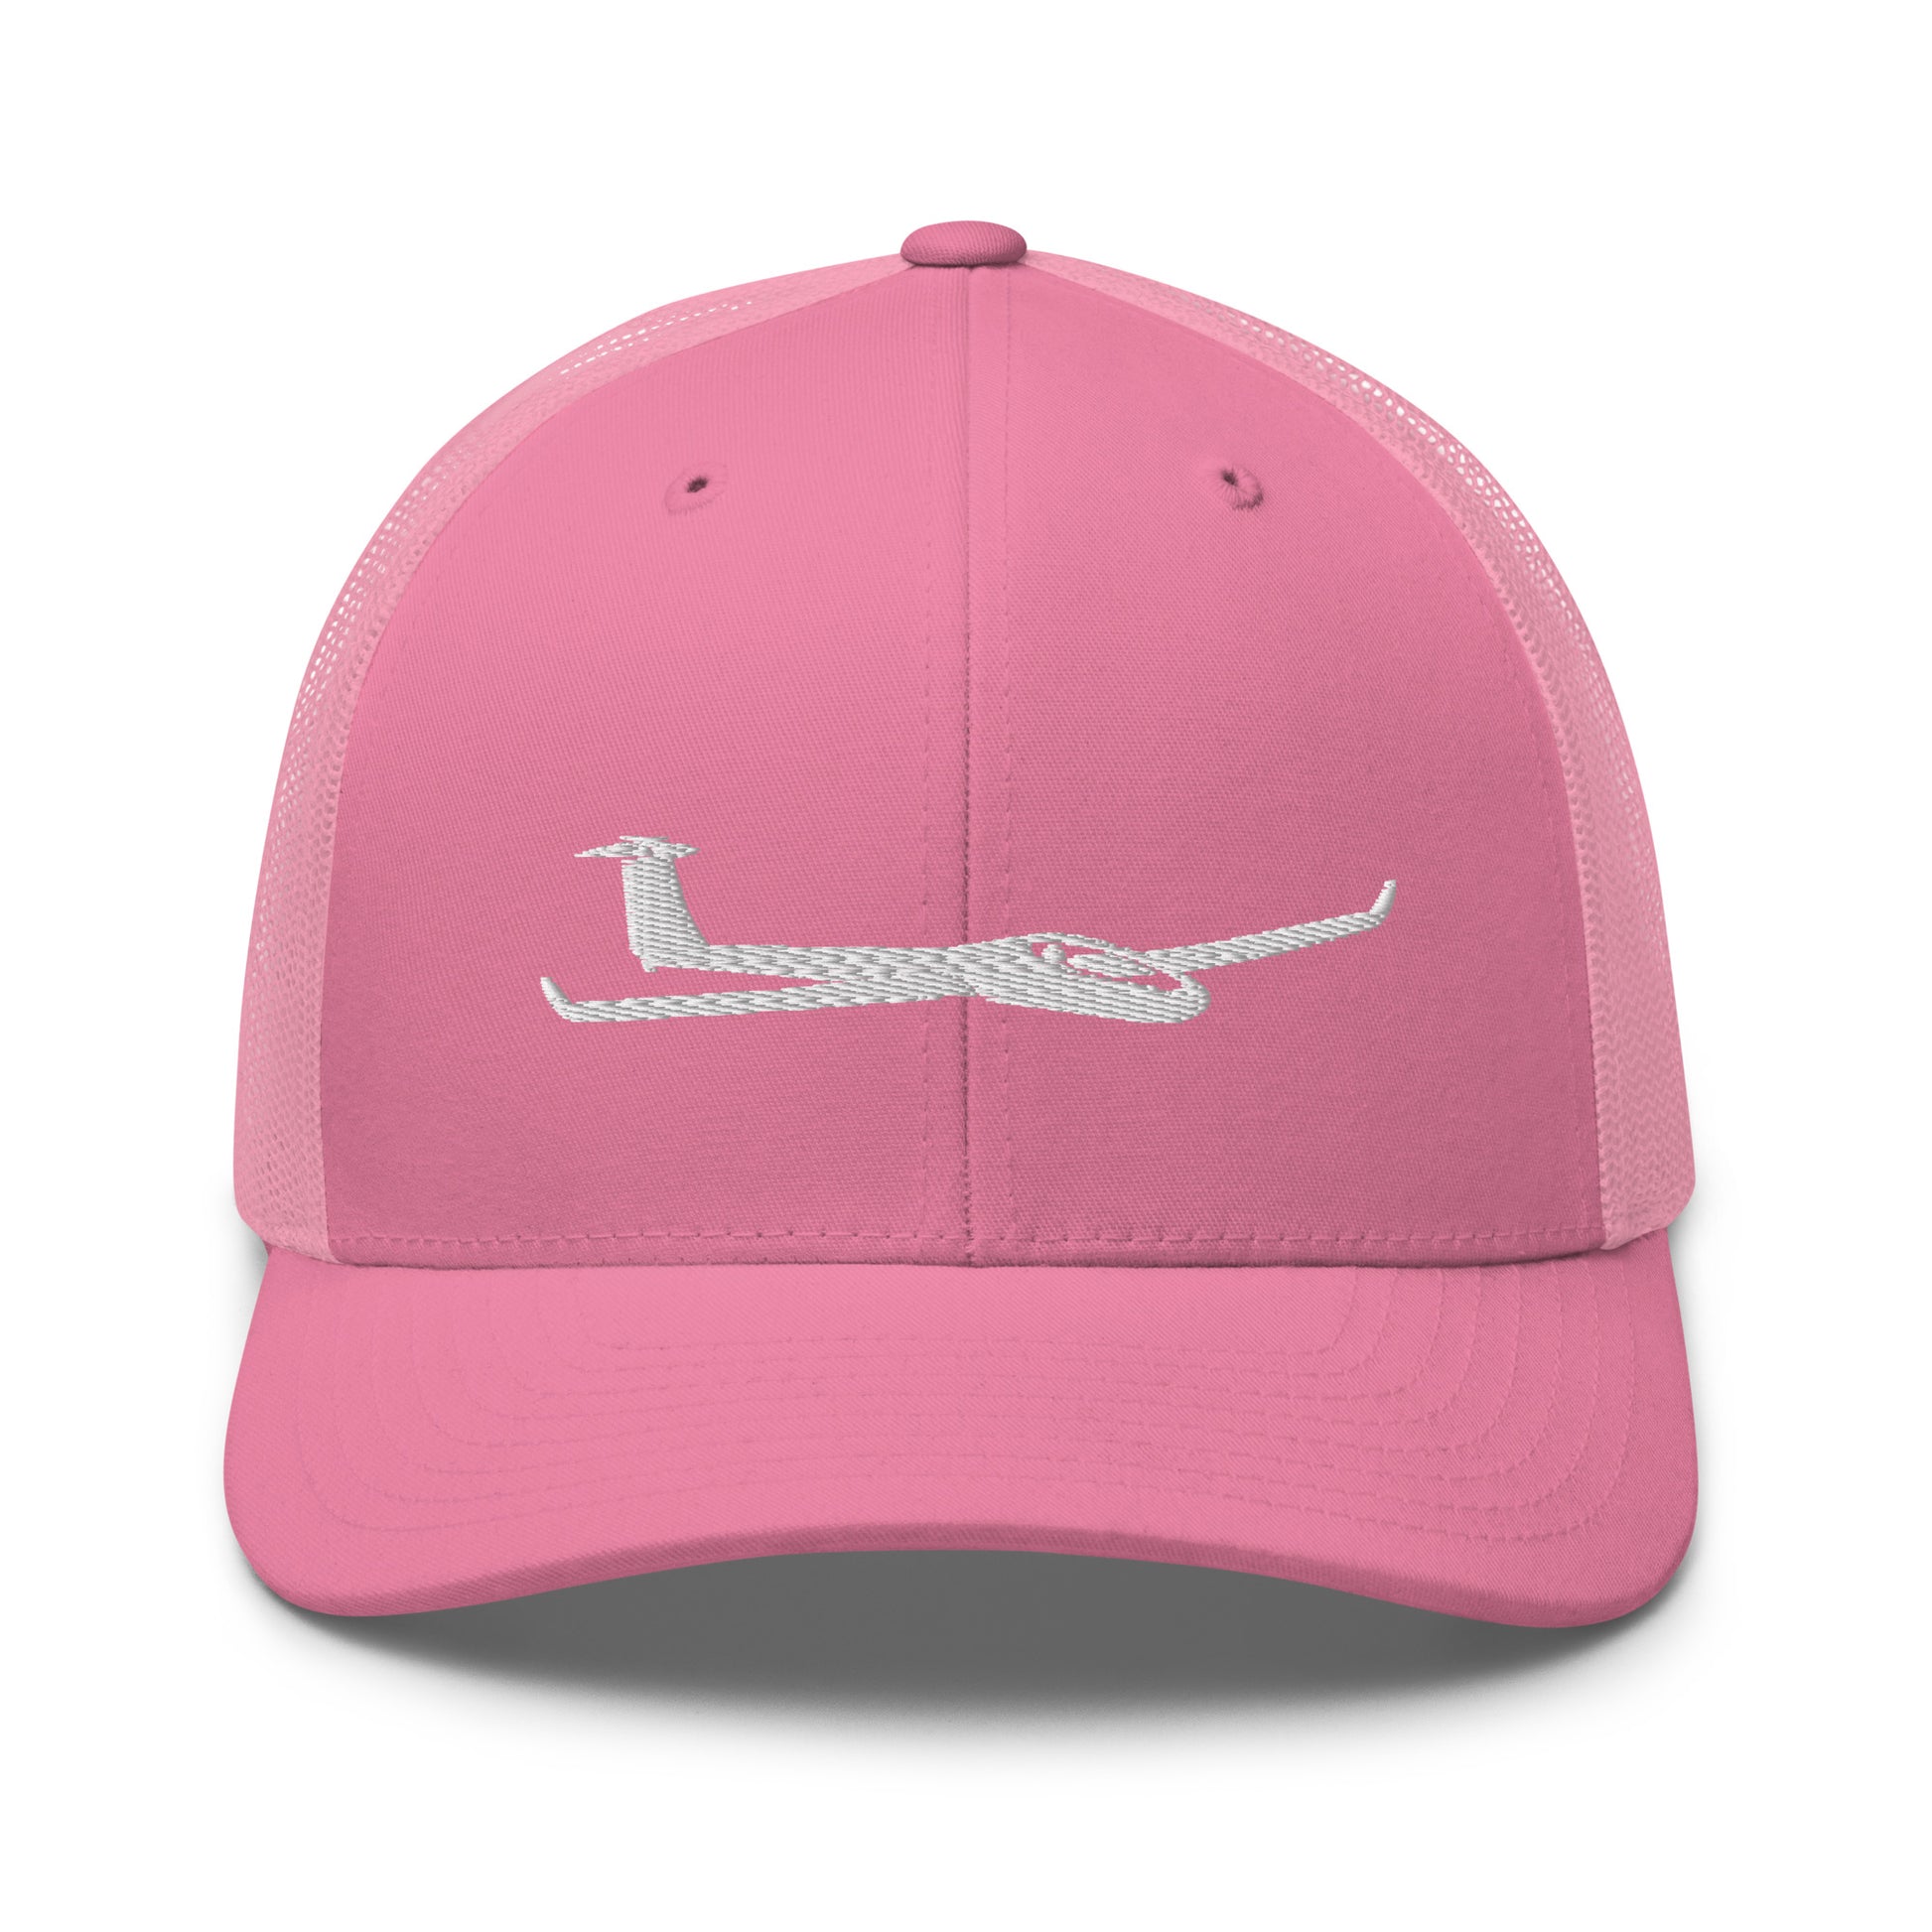 Glider Trucker Hat.  A pink Yupoong 6606 hat with a white glider embroidered on the front panel.